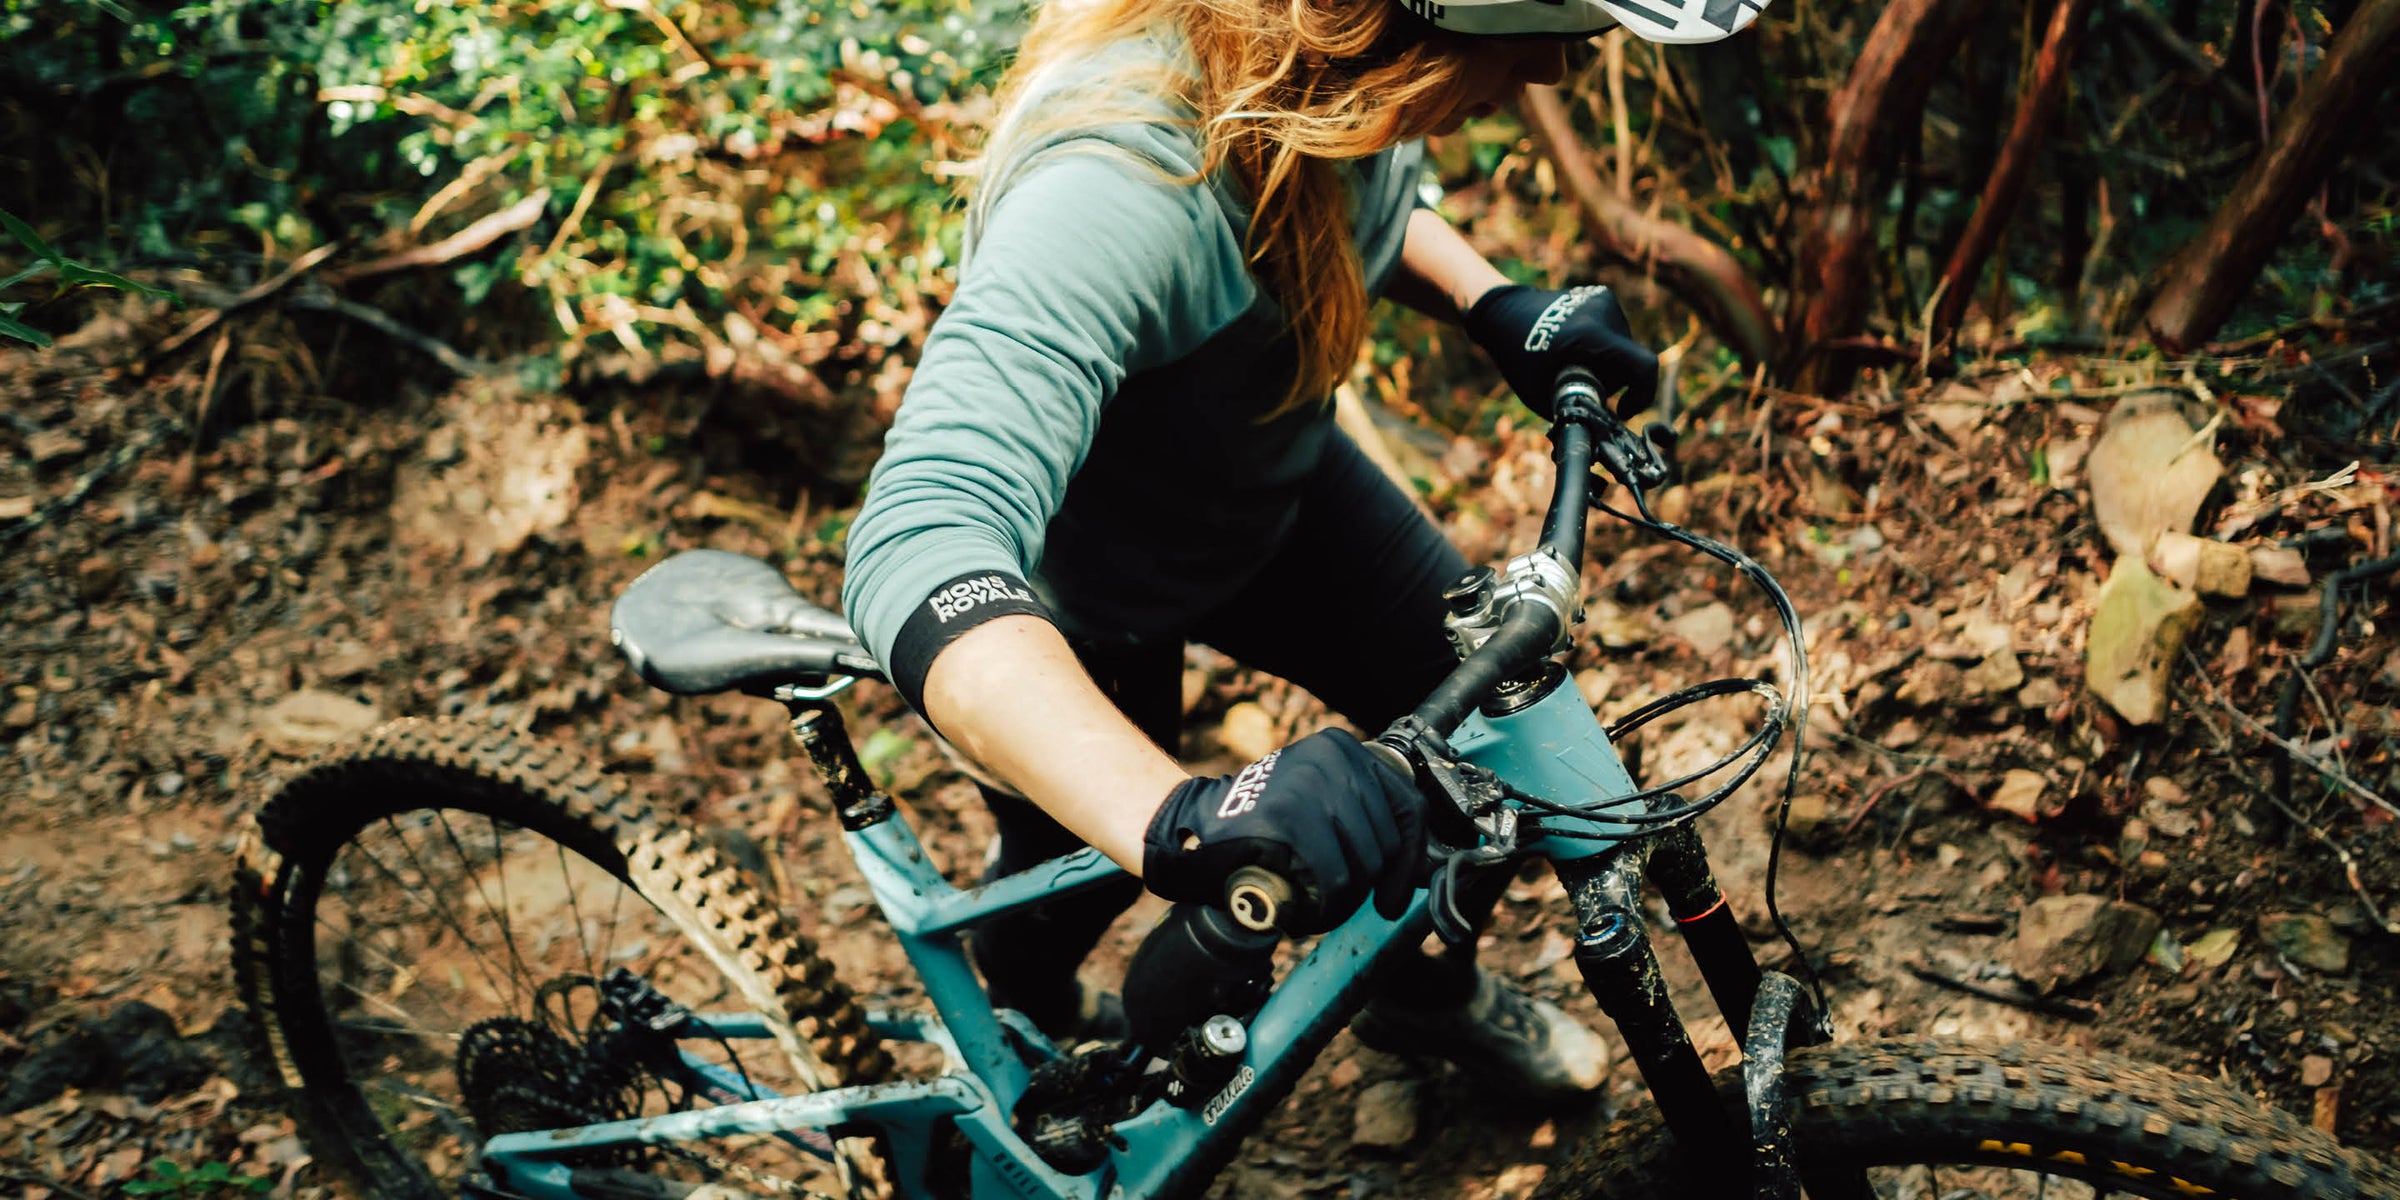 Finding Home Abroad | SCOR Mountain Bikes Stories